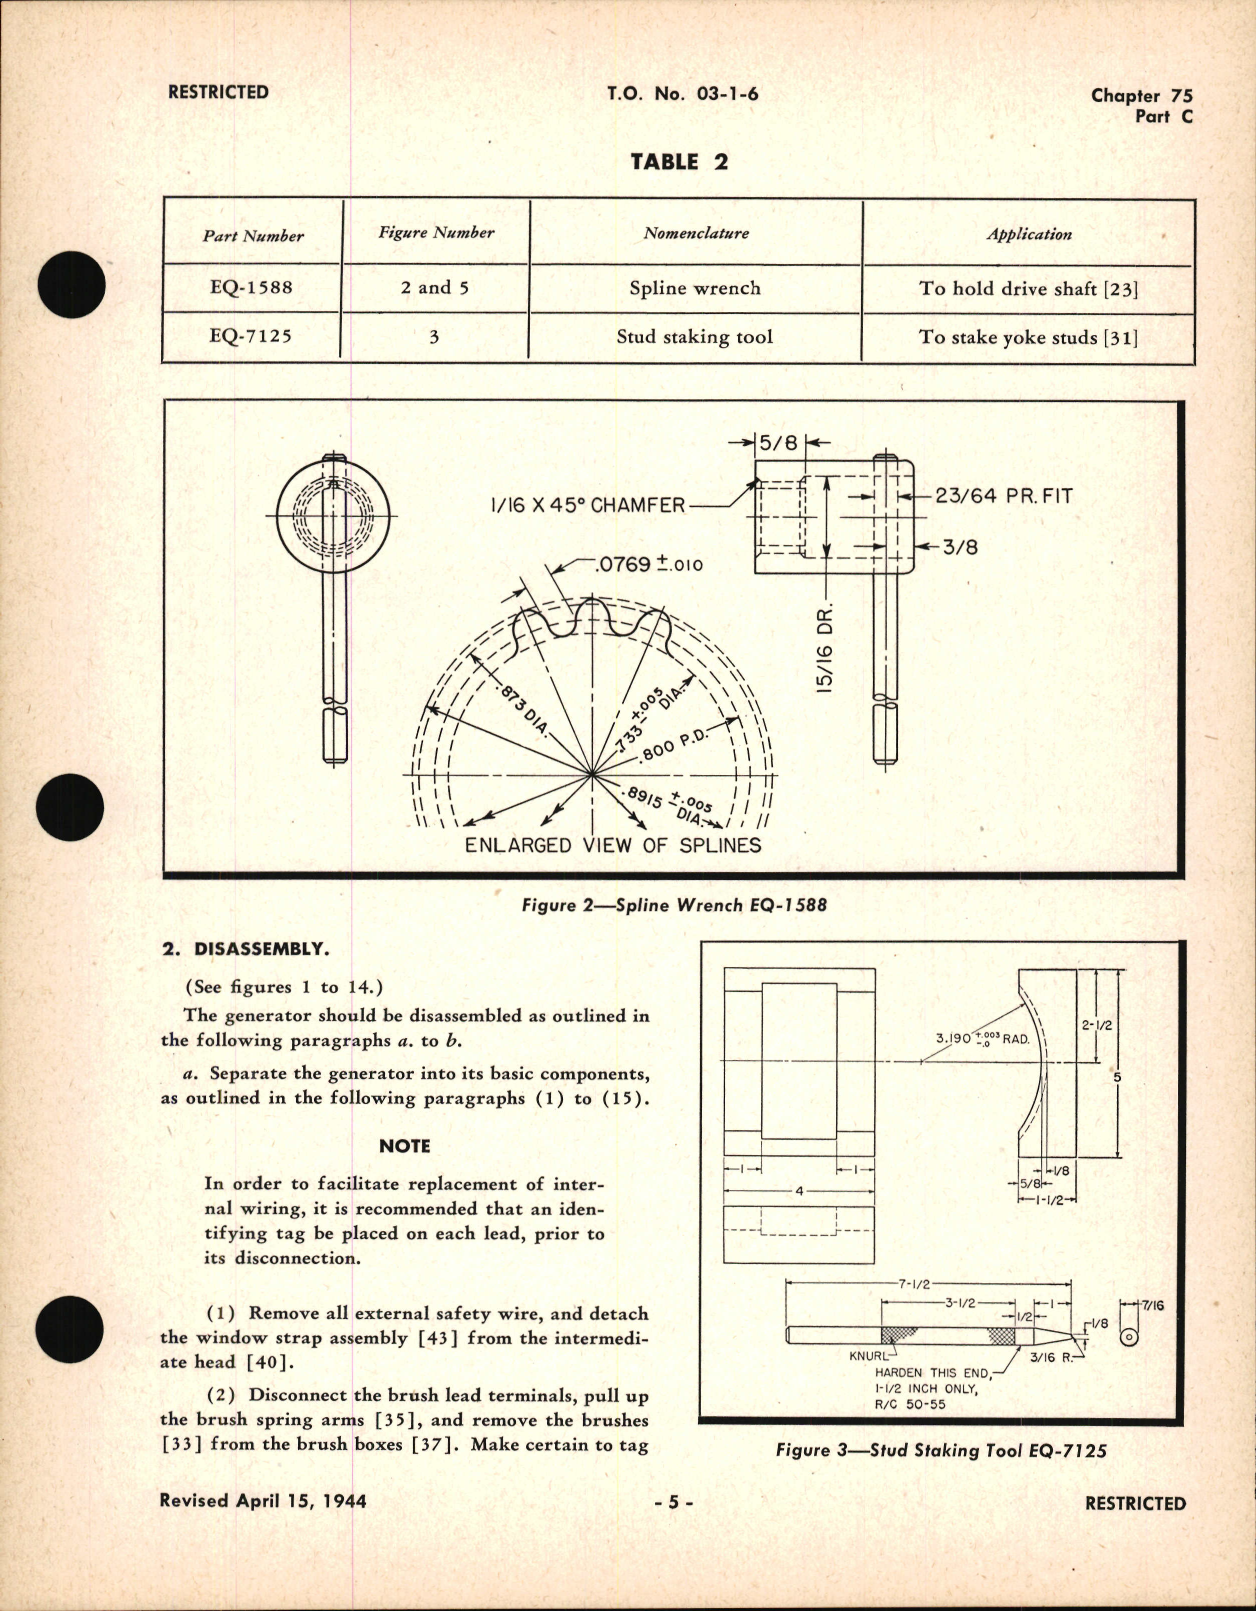 Sample page 5 from AirCorps Library document: Overhaul Instructions for A-C D-C Generator, Type 1097, Ch 75 Part C